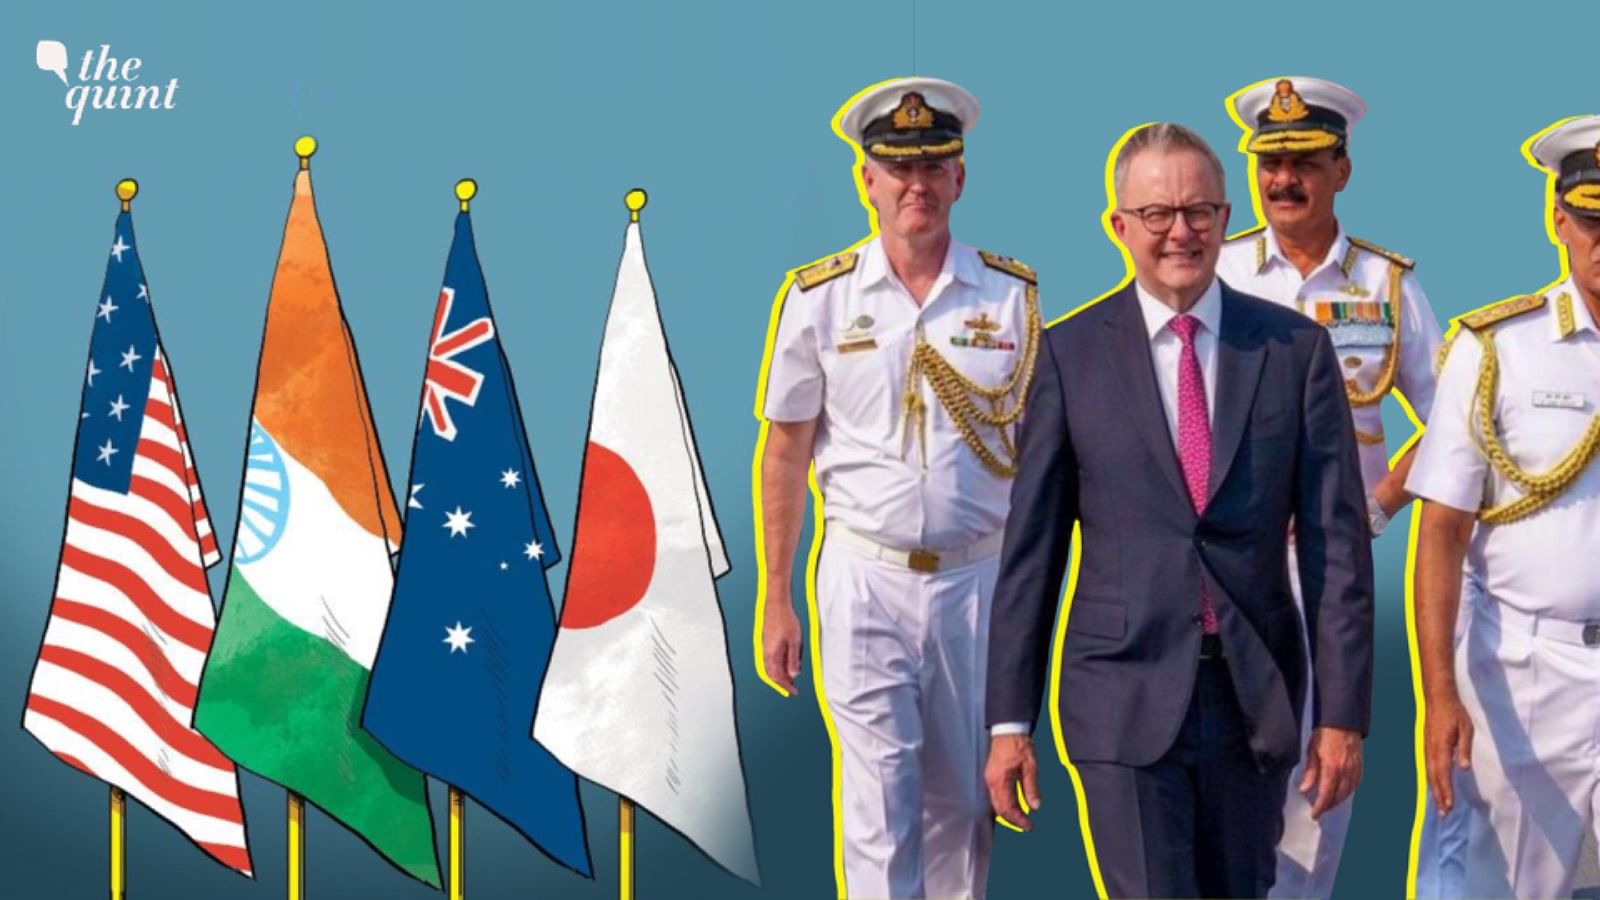 <div class="paragraphs"><p>PM Anthony Albanese declared Australia to host Malabar Exercise in 2023 &amp; cited Delhi as "top-tier security partner"</p></div>